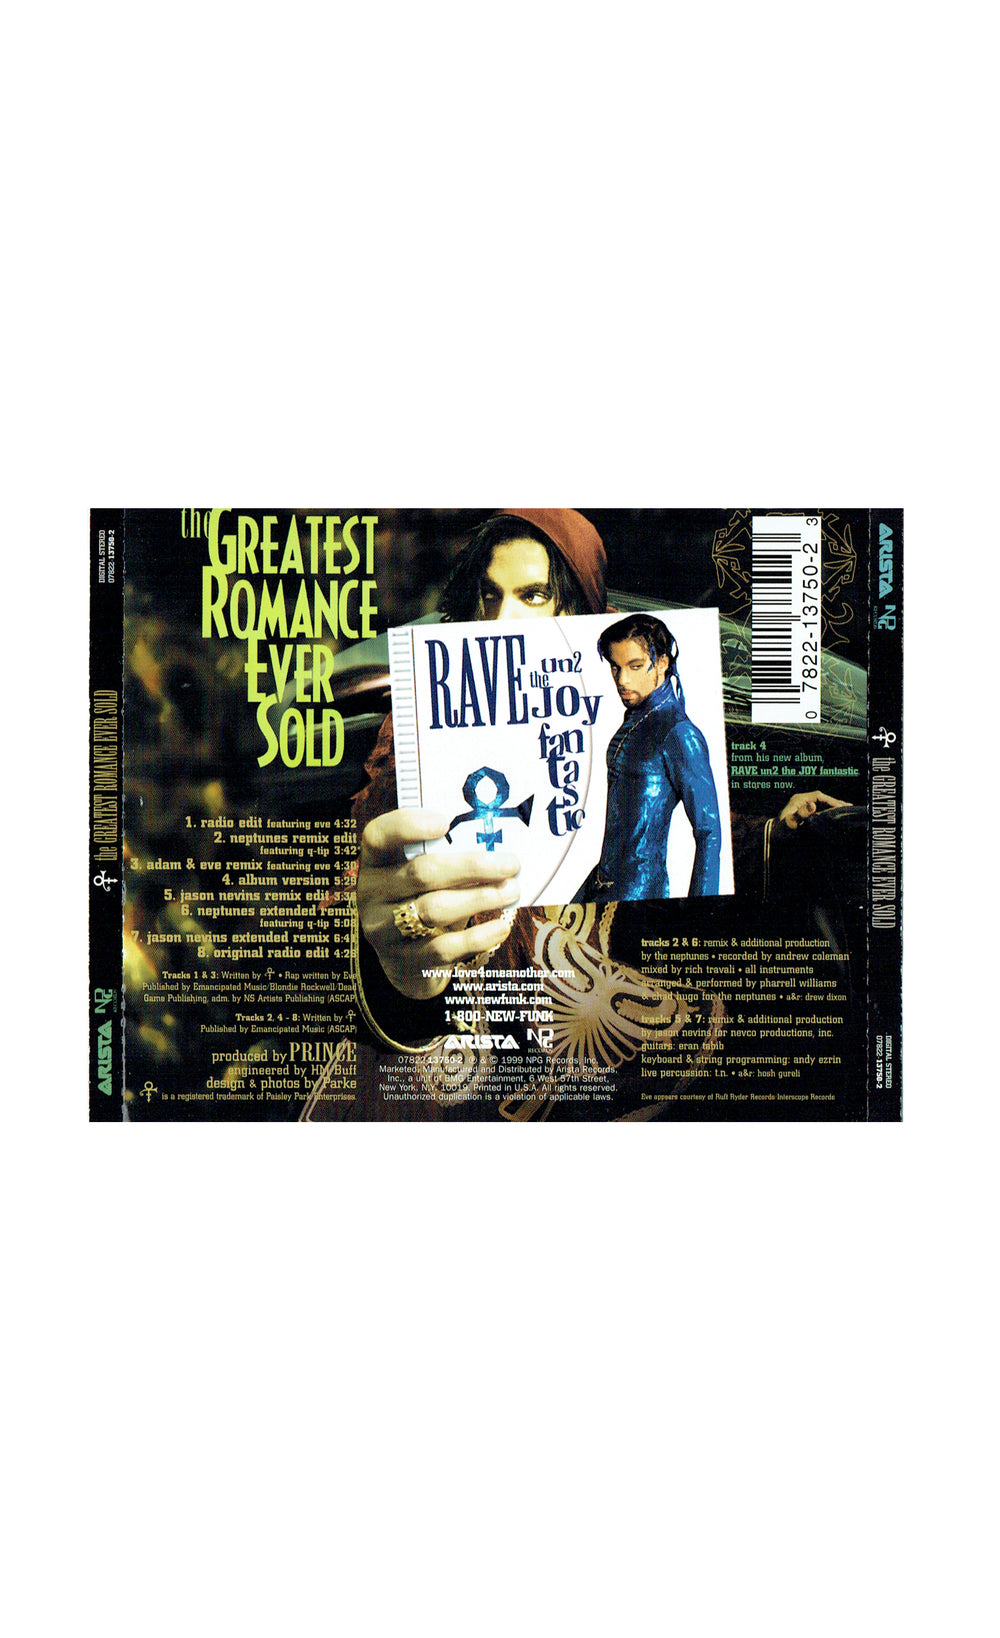 Prince – The Greatest Romance Ever Sold Remix CD Single US Preloved 8 TRACKS: 1999